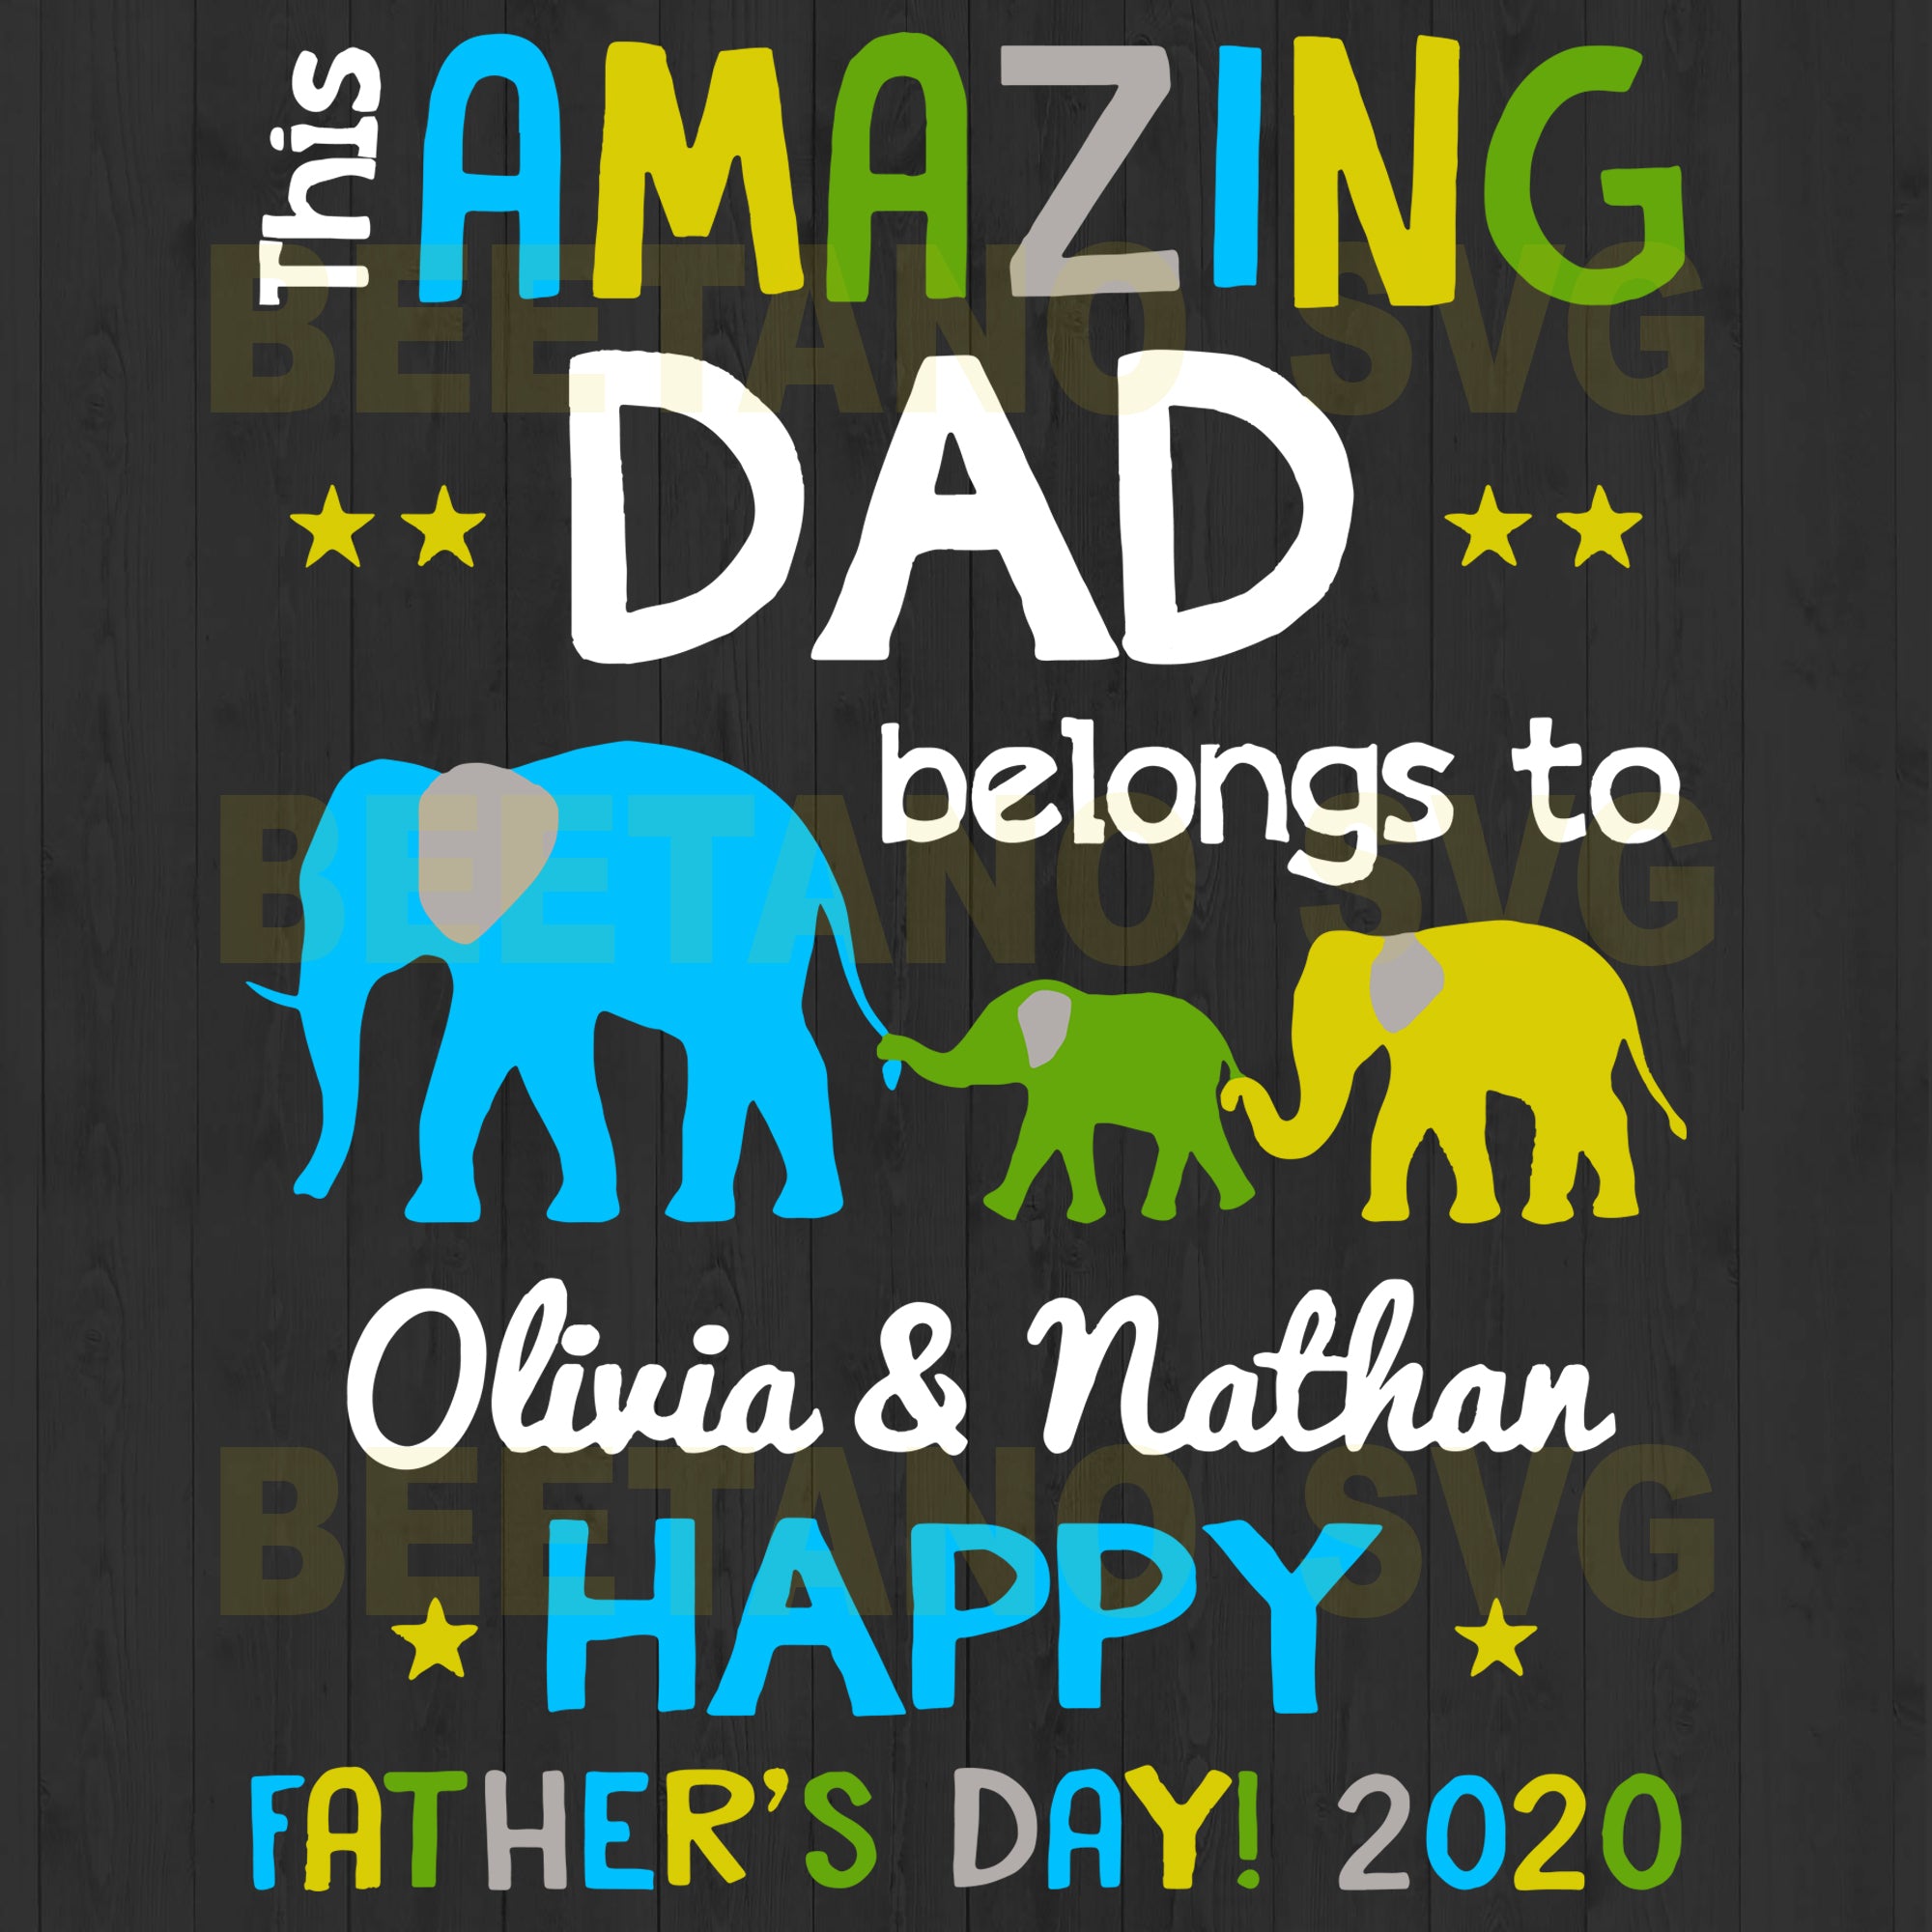 Download This Amazing Dad Belongs To Happy Father S Day Svg Files For Instant D Beetanosvg Scalable Vector Graphics